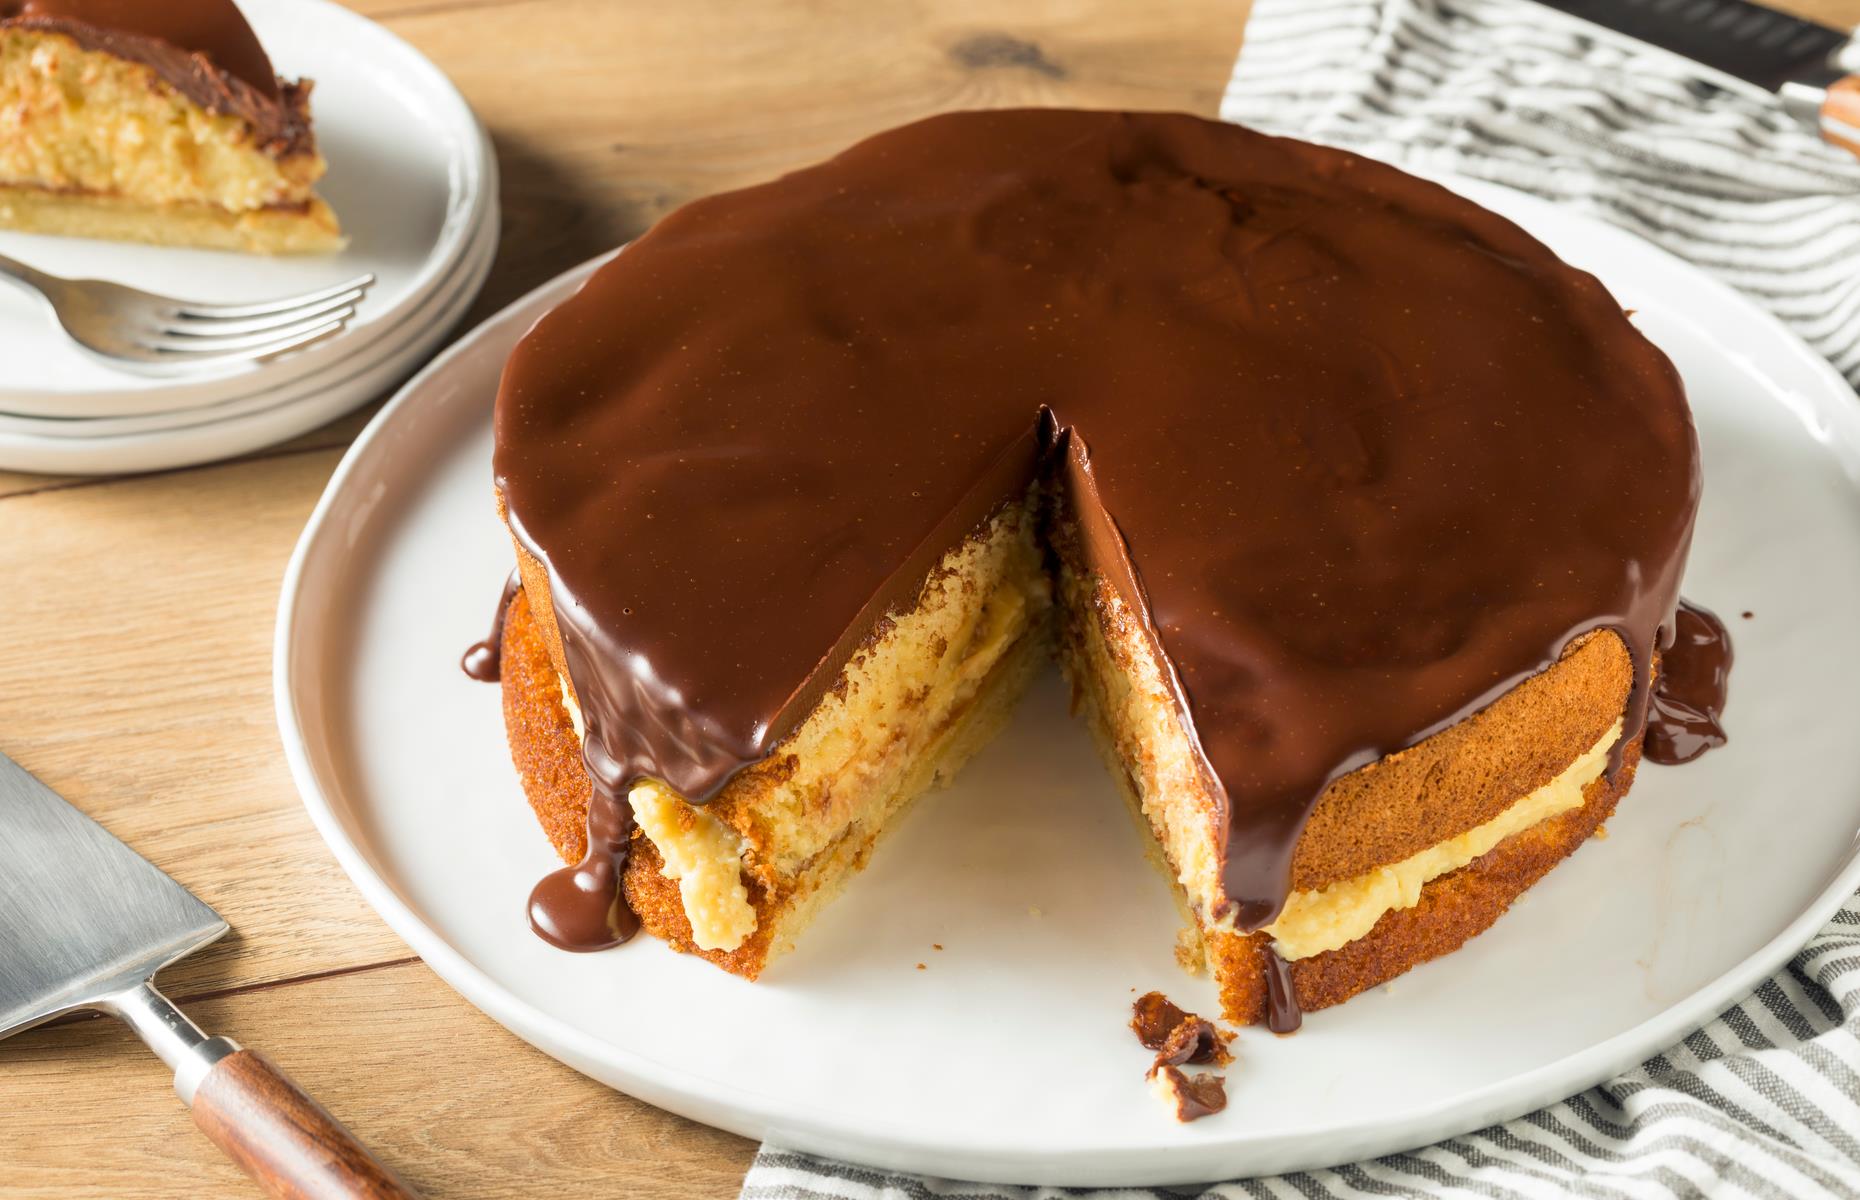 <p>The Boston cream pie is, in fact, a cake: a buttery yellow sponge filled with custard or cream and topped with chocolate icing. It’s <a href="https://boston.eater.com/2015/1/30/7949395/boston-cream-pie-history">claimed to have been invented</a> in 1856 at Boston’s Parker House (now Omni Parker House), with the hotel still serving its signature dessert. Pie and cake tins were often used interchangeably, so pies were often referred to as cakes and vice versa.</p>  <p><a href="https://www.lovefood.com/galleries/87278/the-best-pie-in-every-state?page=1"><strong>Find the best pie in your state here</strong></a></p>